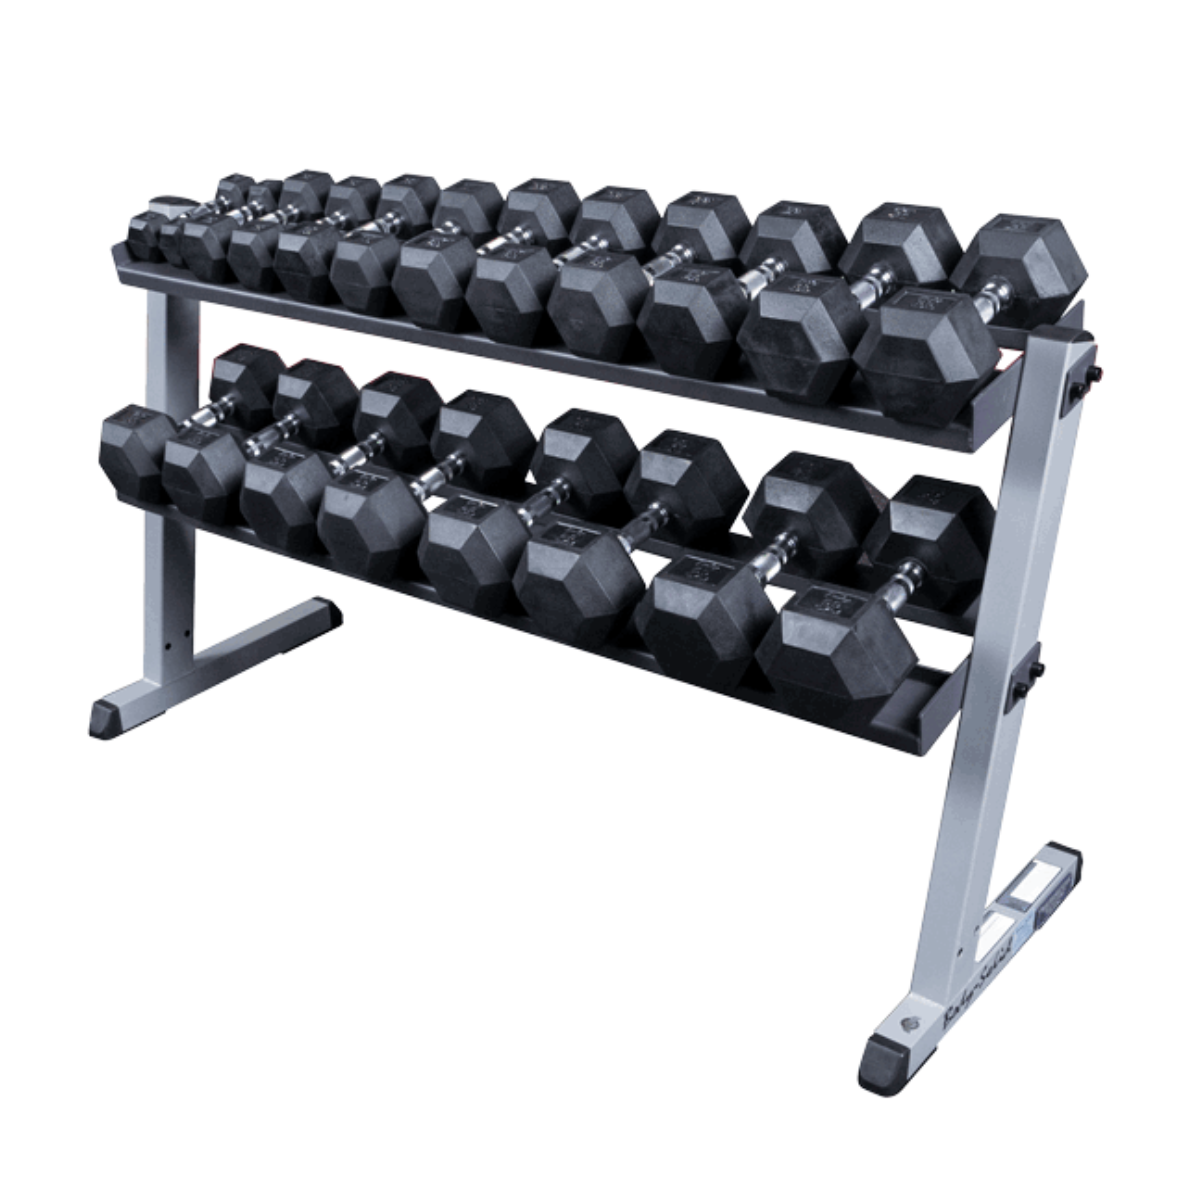 Body-Solid Double Tier Dumbbell Rack